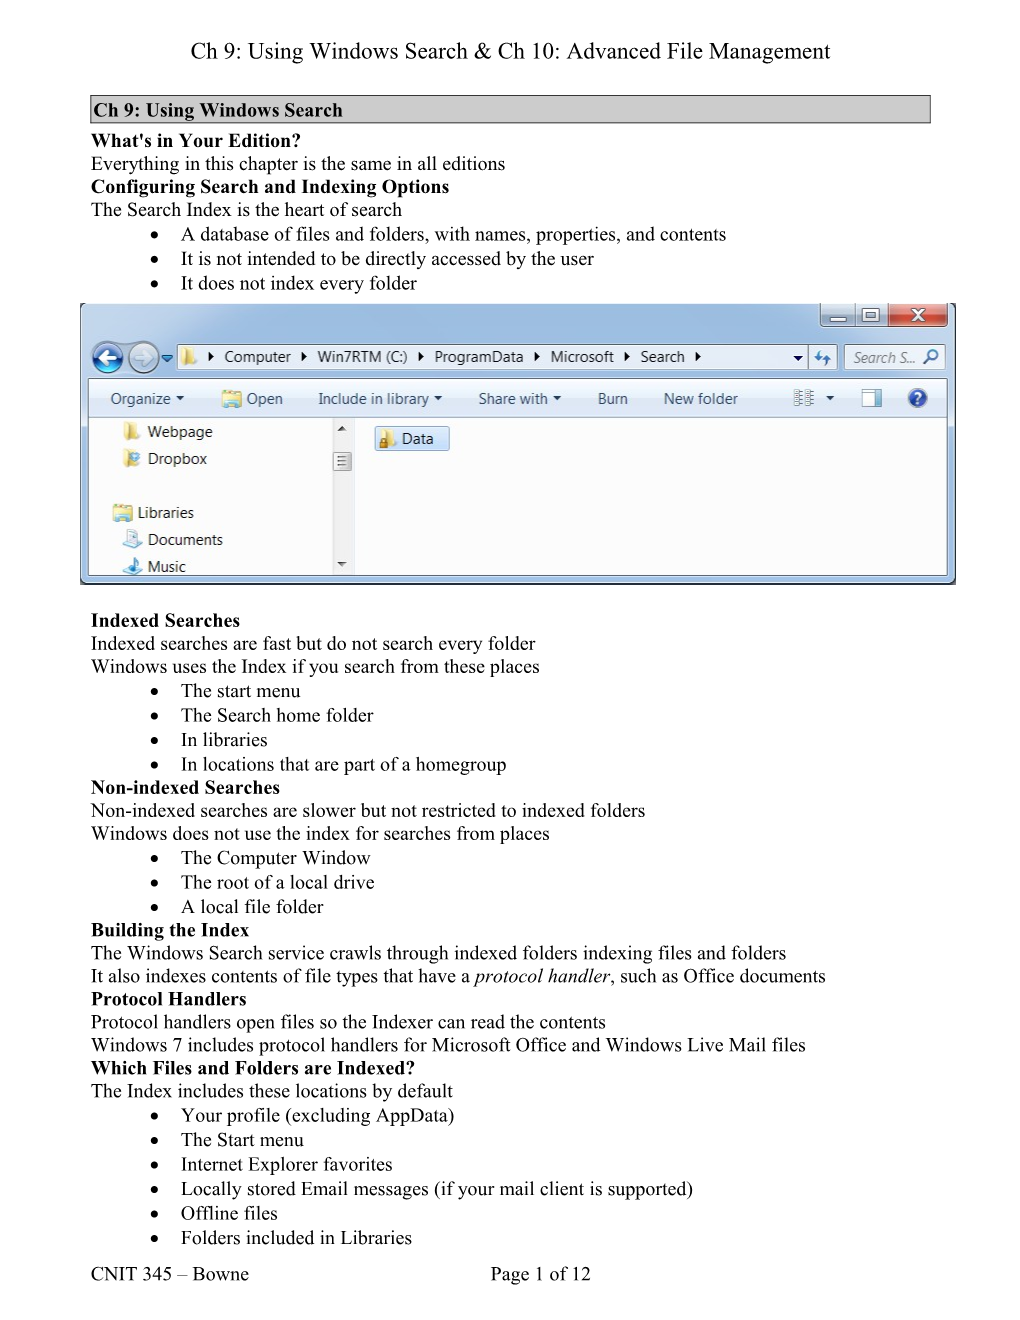 Ch 9: Using Windows Search & Ch 10: Advanced File Management